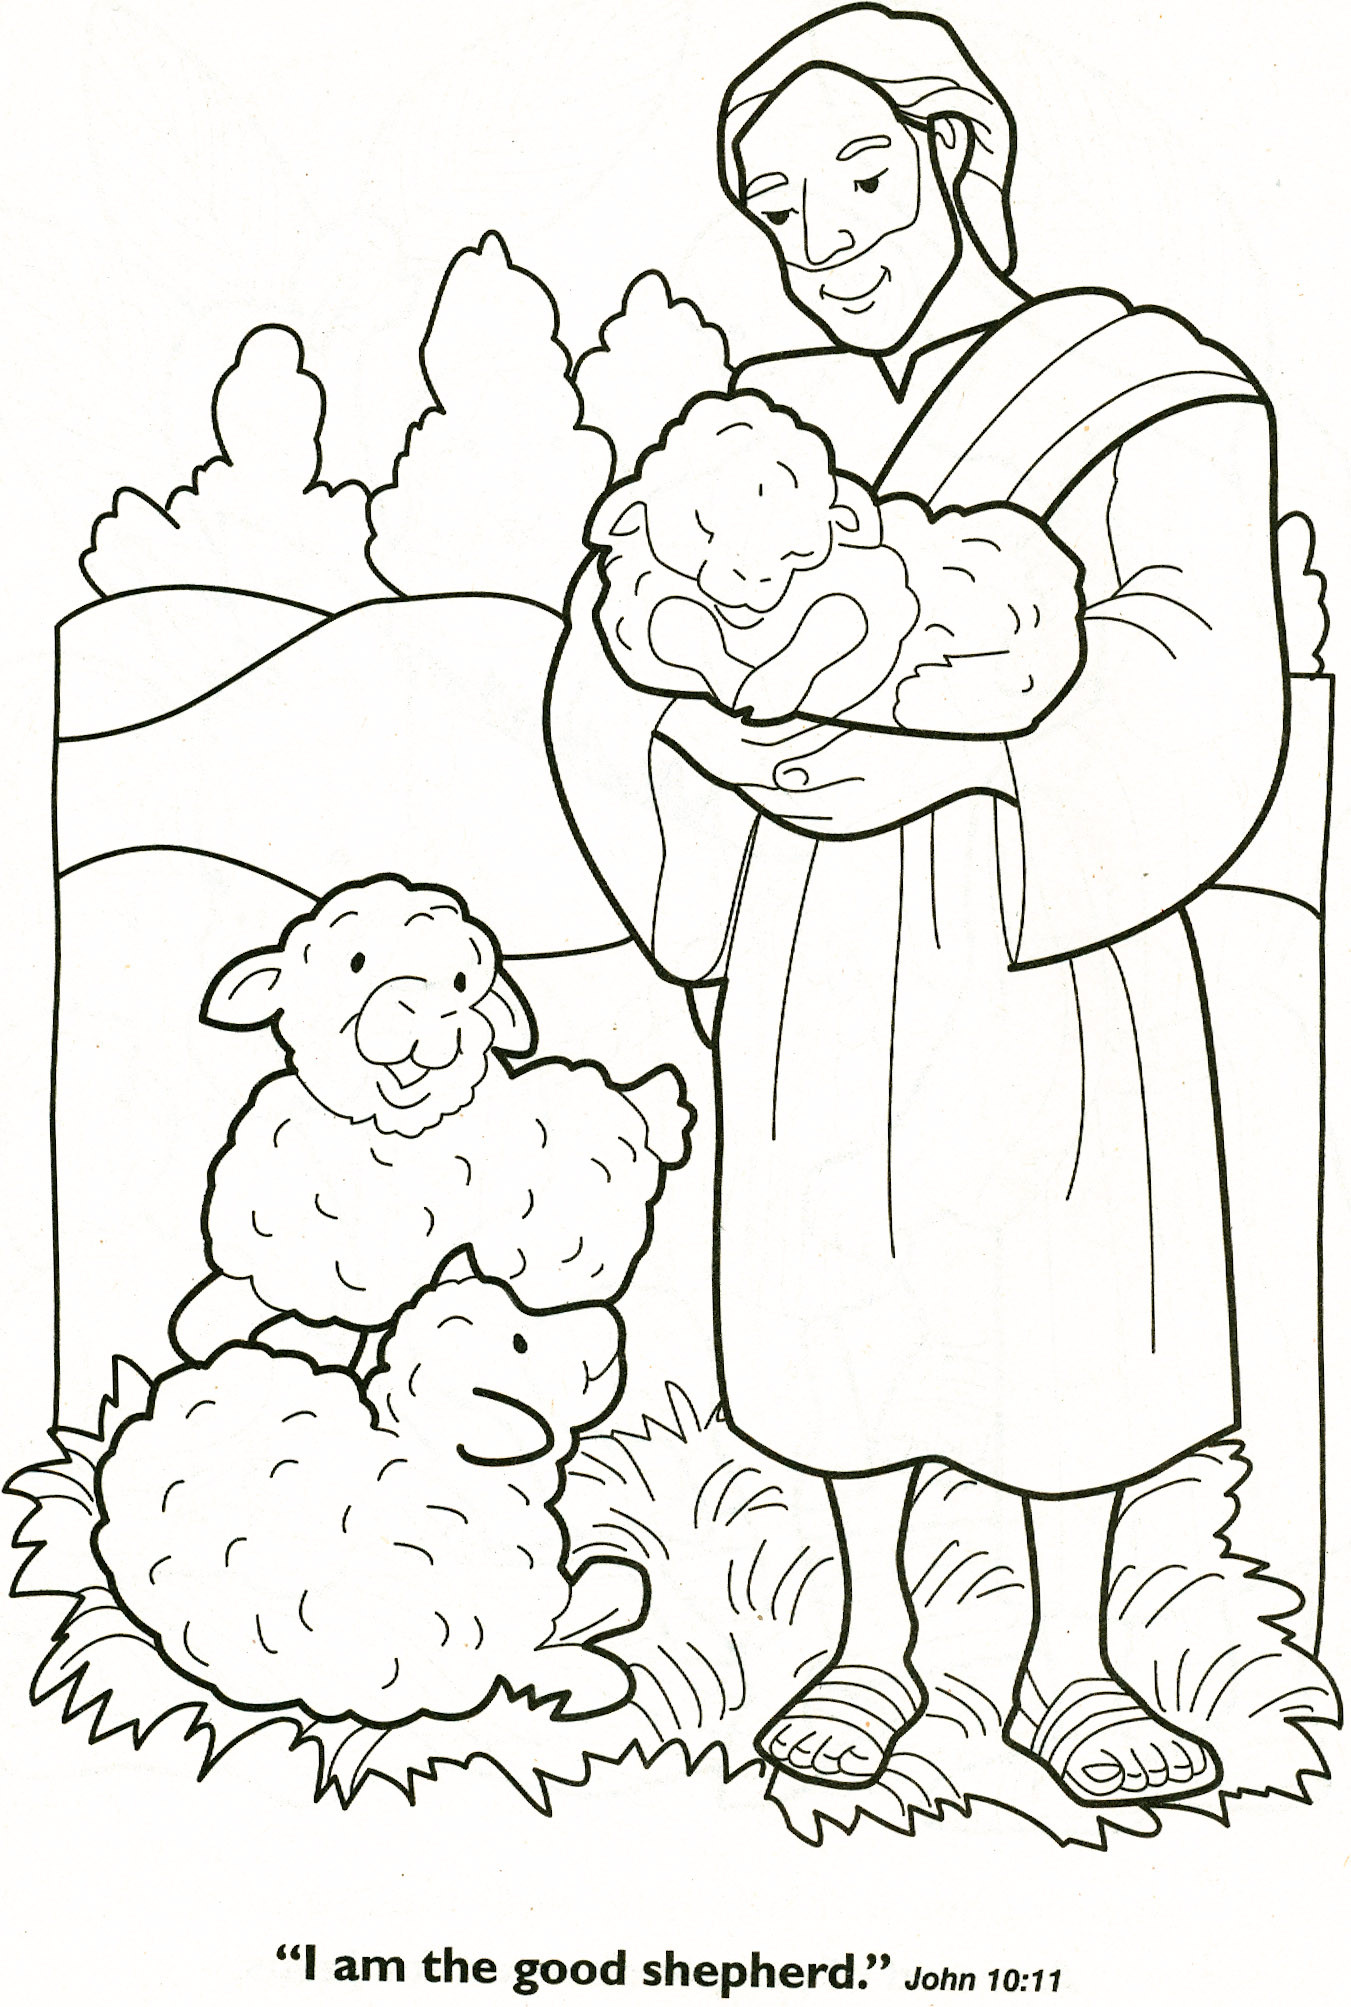 The Best Ideas for Free Bible Coloring Pages for Kids - Home, Family